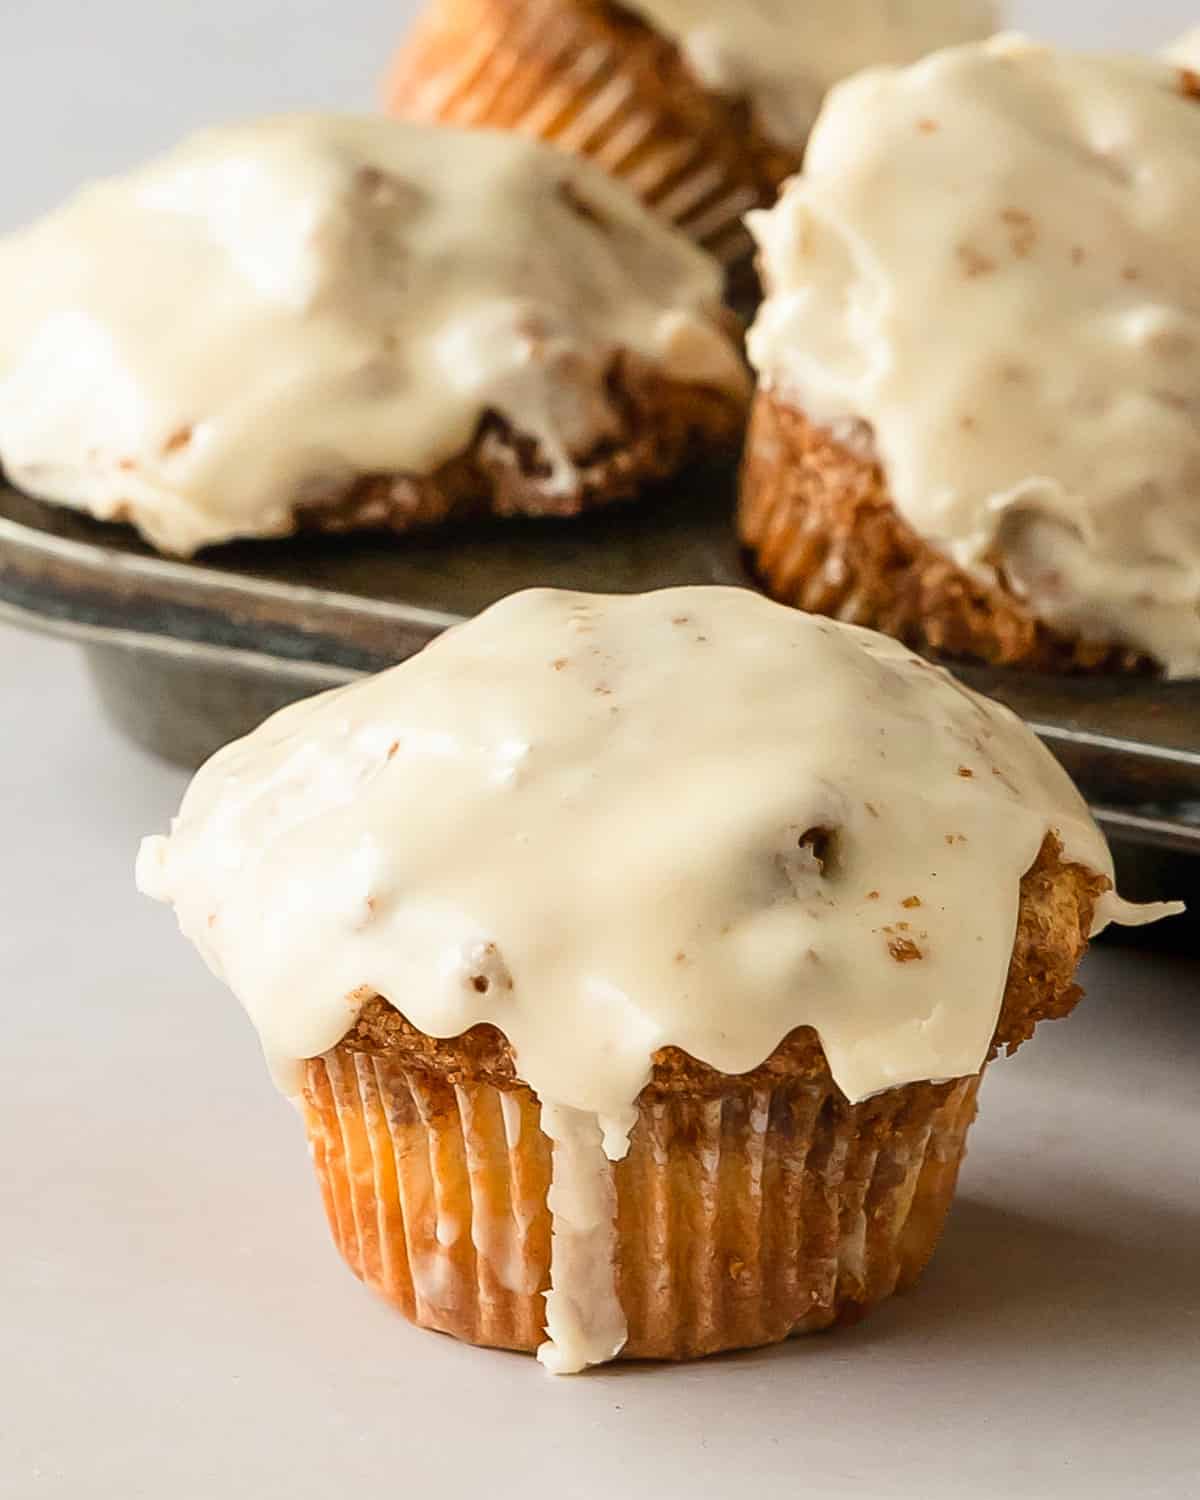 Cinnamon roll muffins are wonderfully soft, light and fluffy no yeast muffins filled with ribbons of sweet cinnamon roll filling.  Once baked, these cute cinnamon rolls muffins are topped with a sweet and tangy cream cheese glaze. These cinnamon bun muffins are quick, easy to make and muffins are perfect for breakfasts or snacks. 